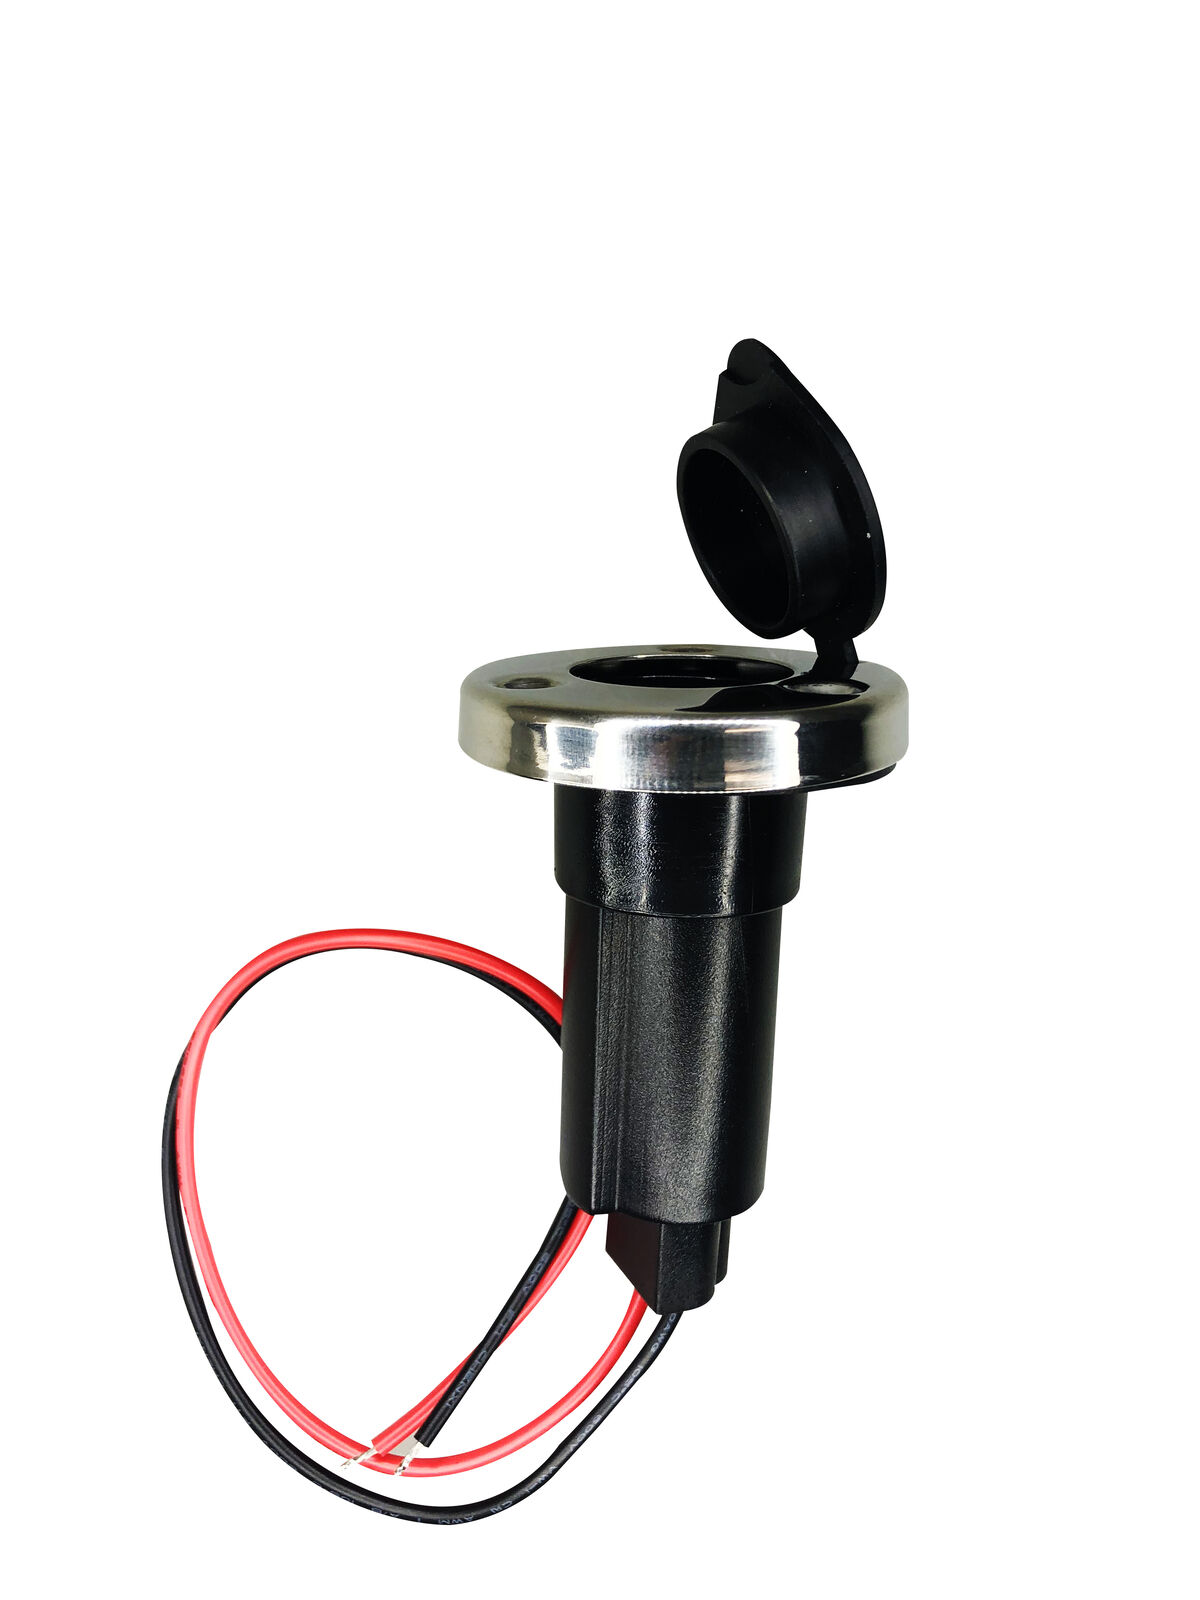 Pactrade Black Rubber Cap 2-Prong Stern Light Pole Base SS304 Top Socket Plug-In